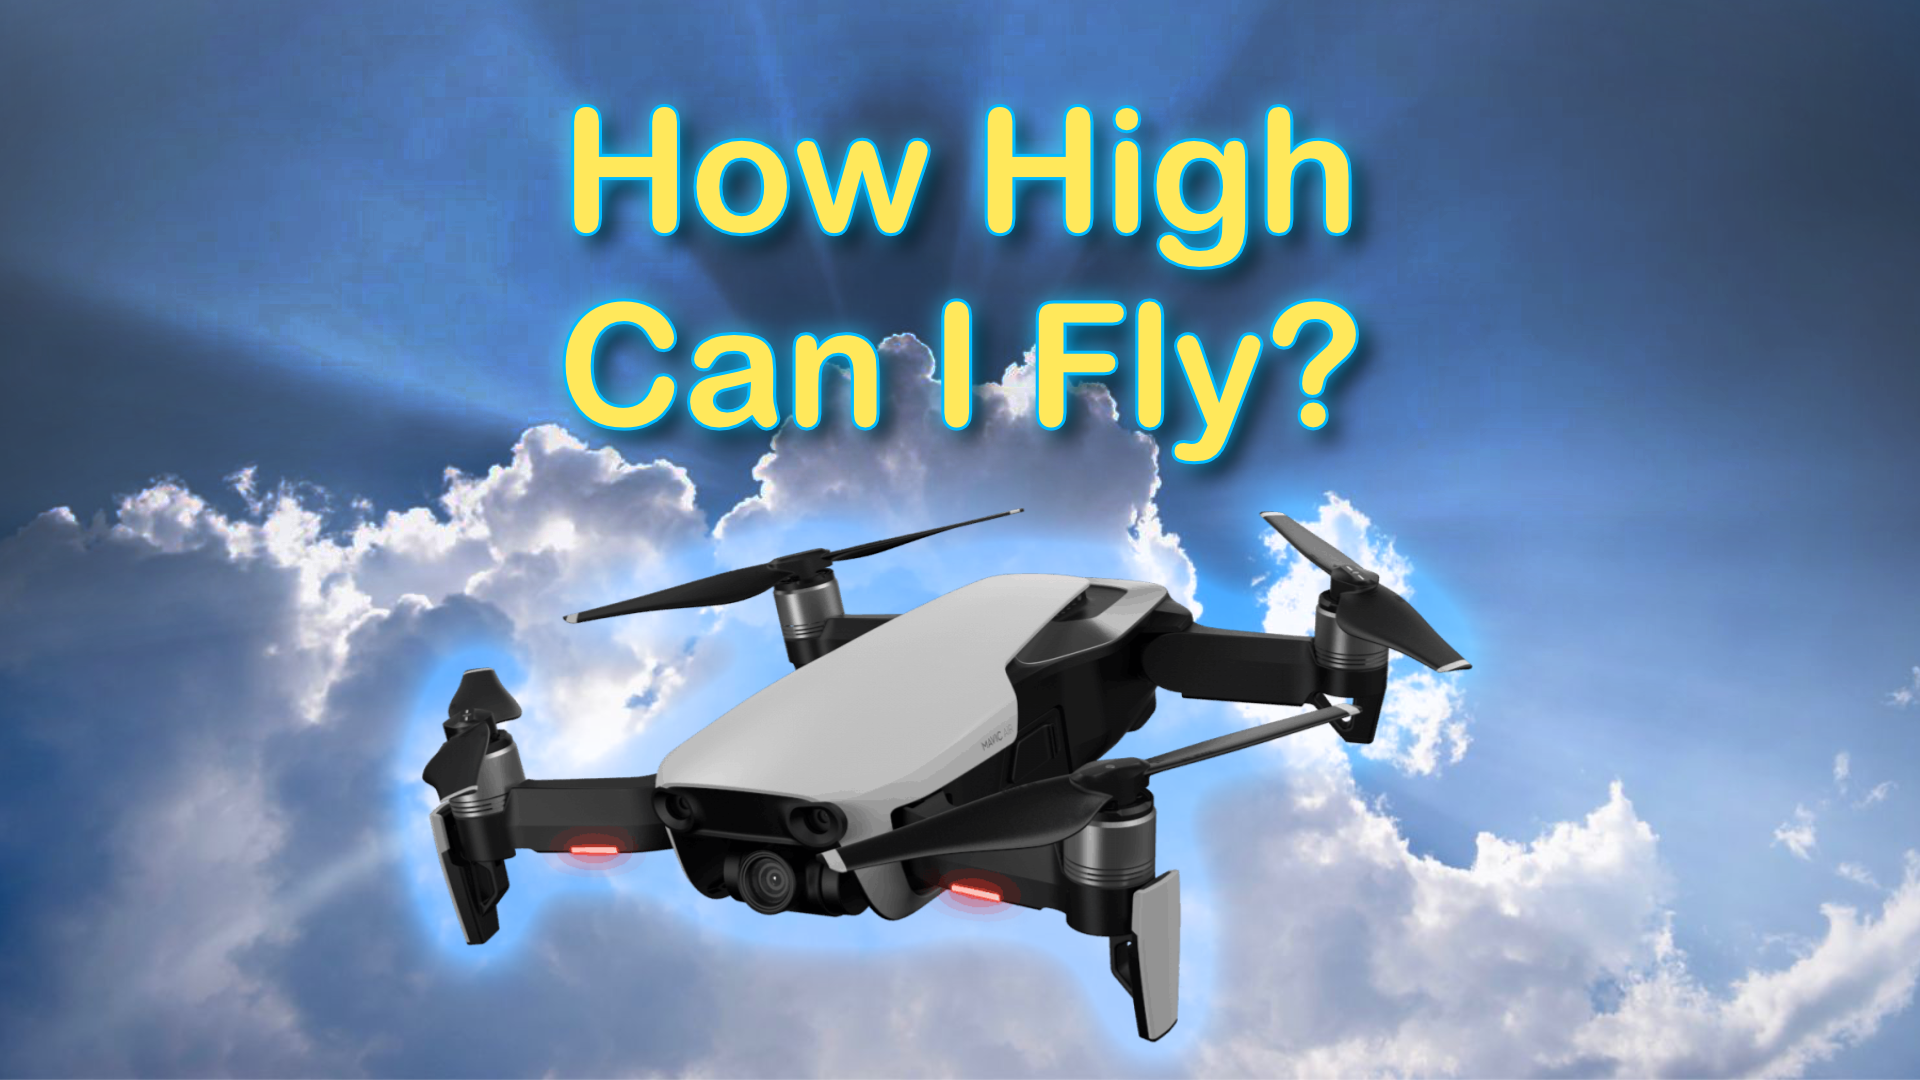 How High Can I Fly?